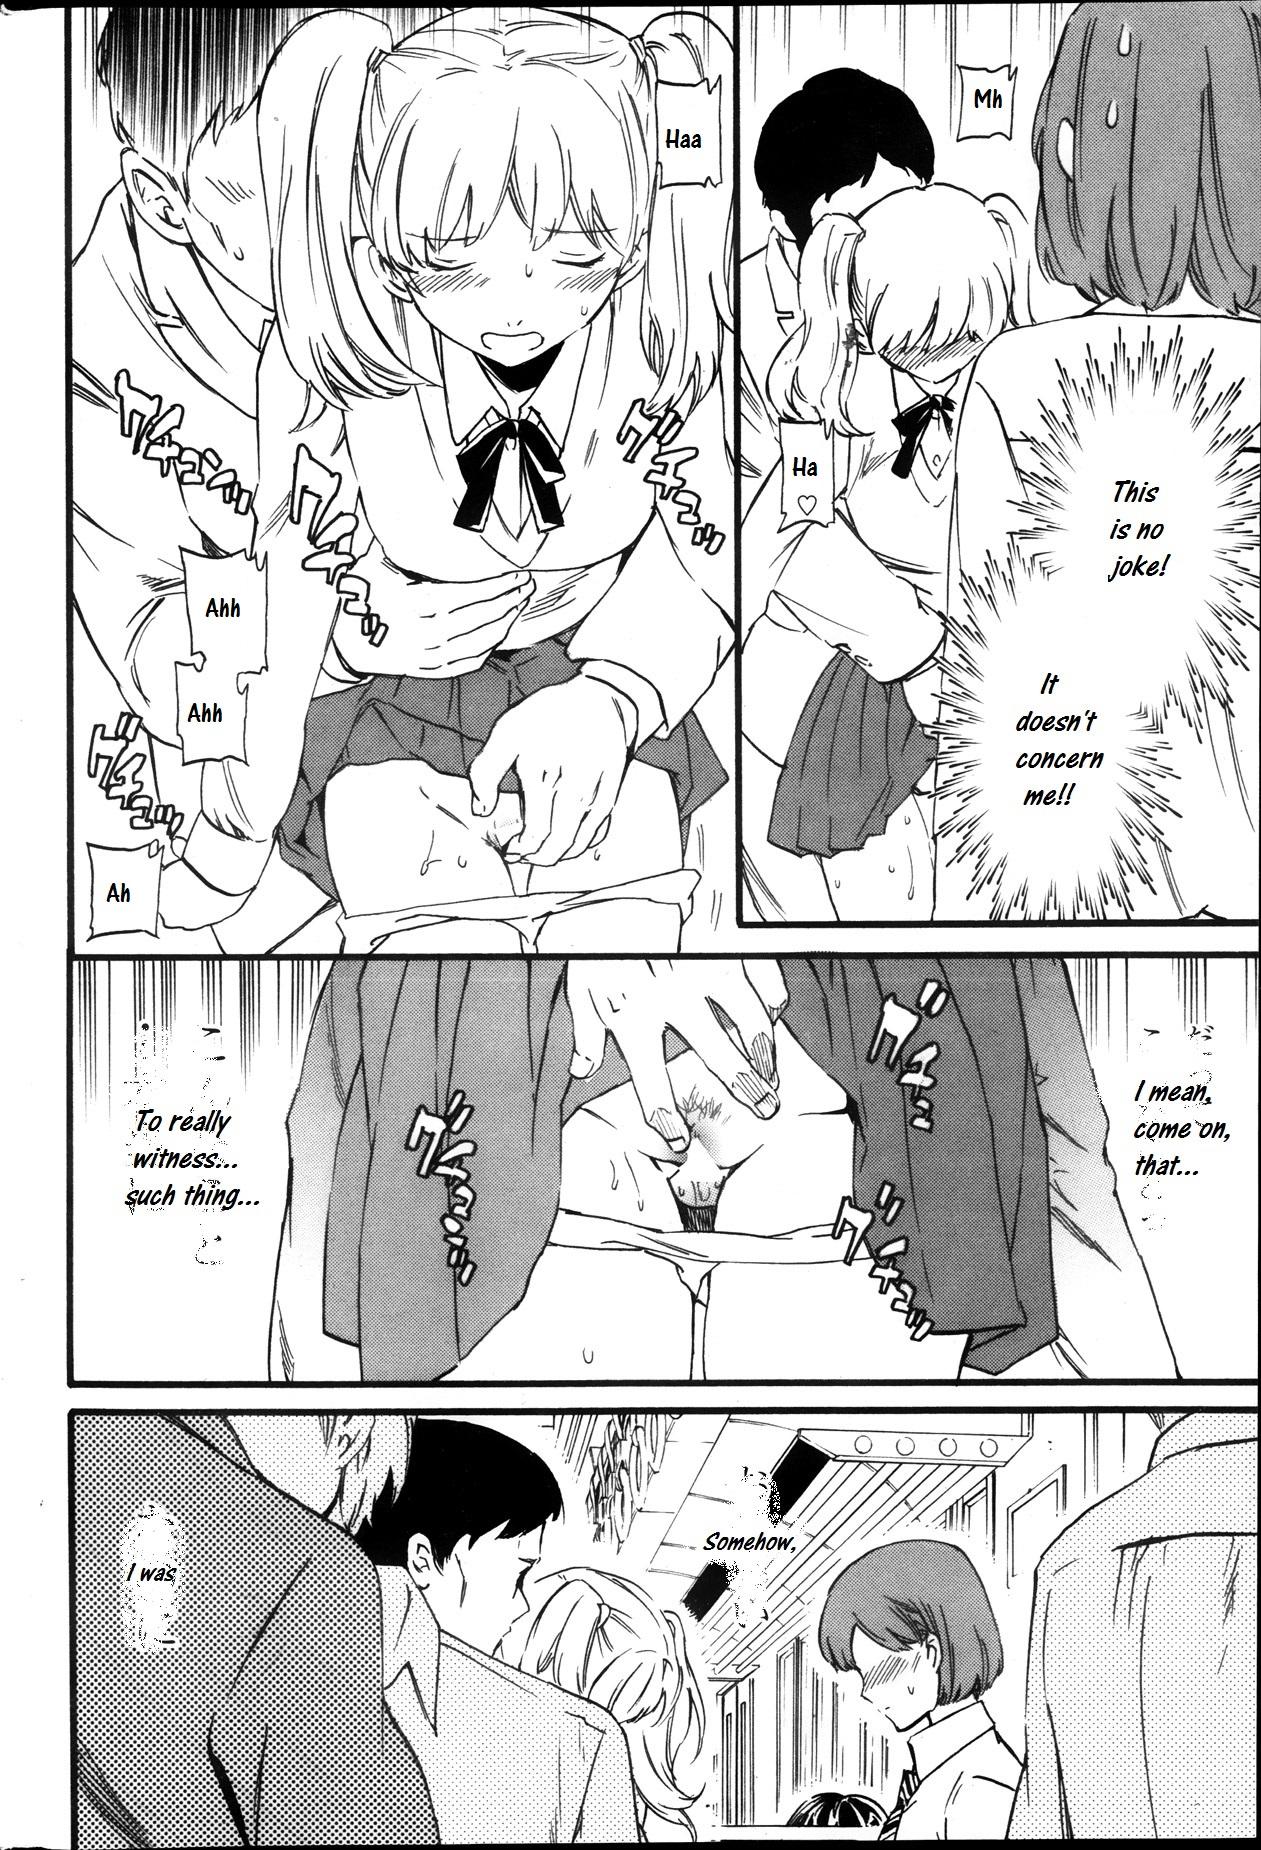 Japan Role Playing Clothed Sex - Page 8